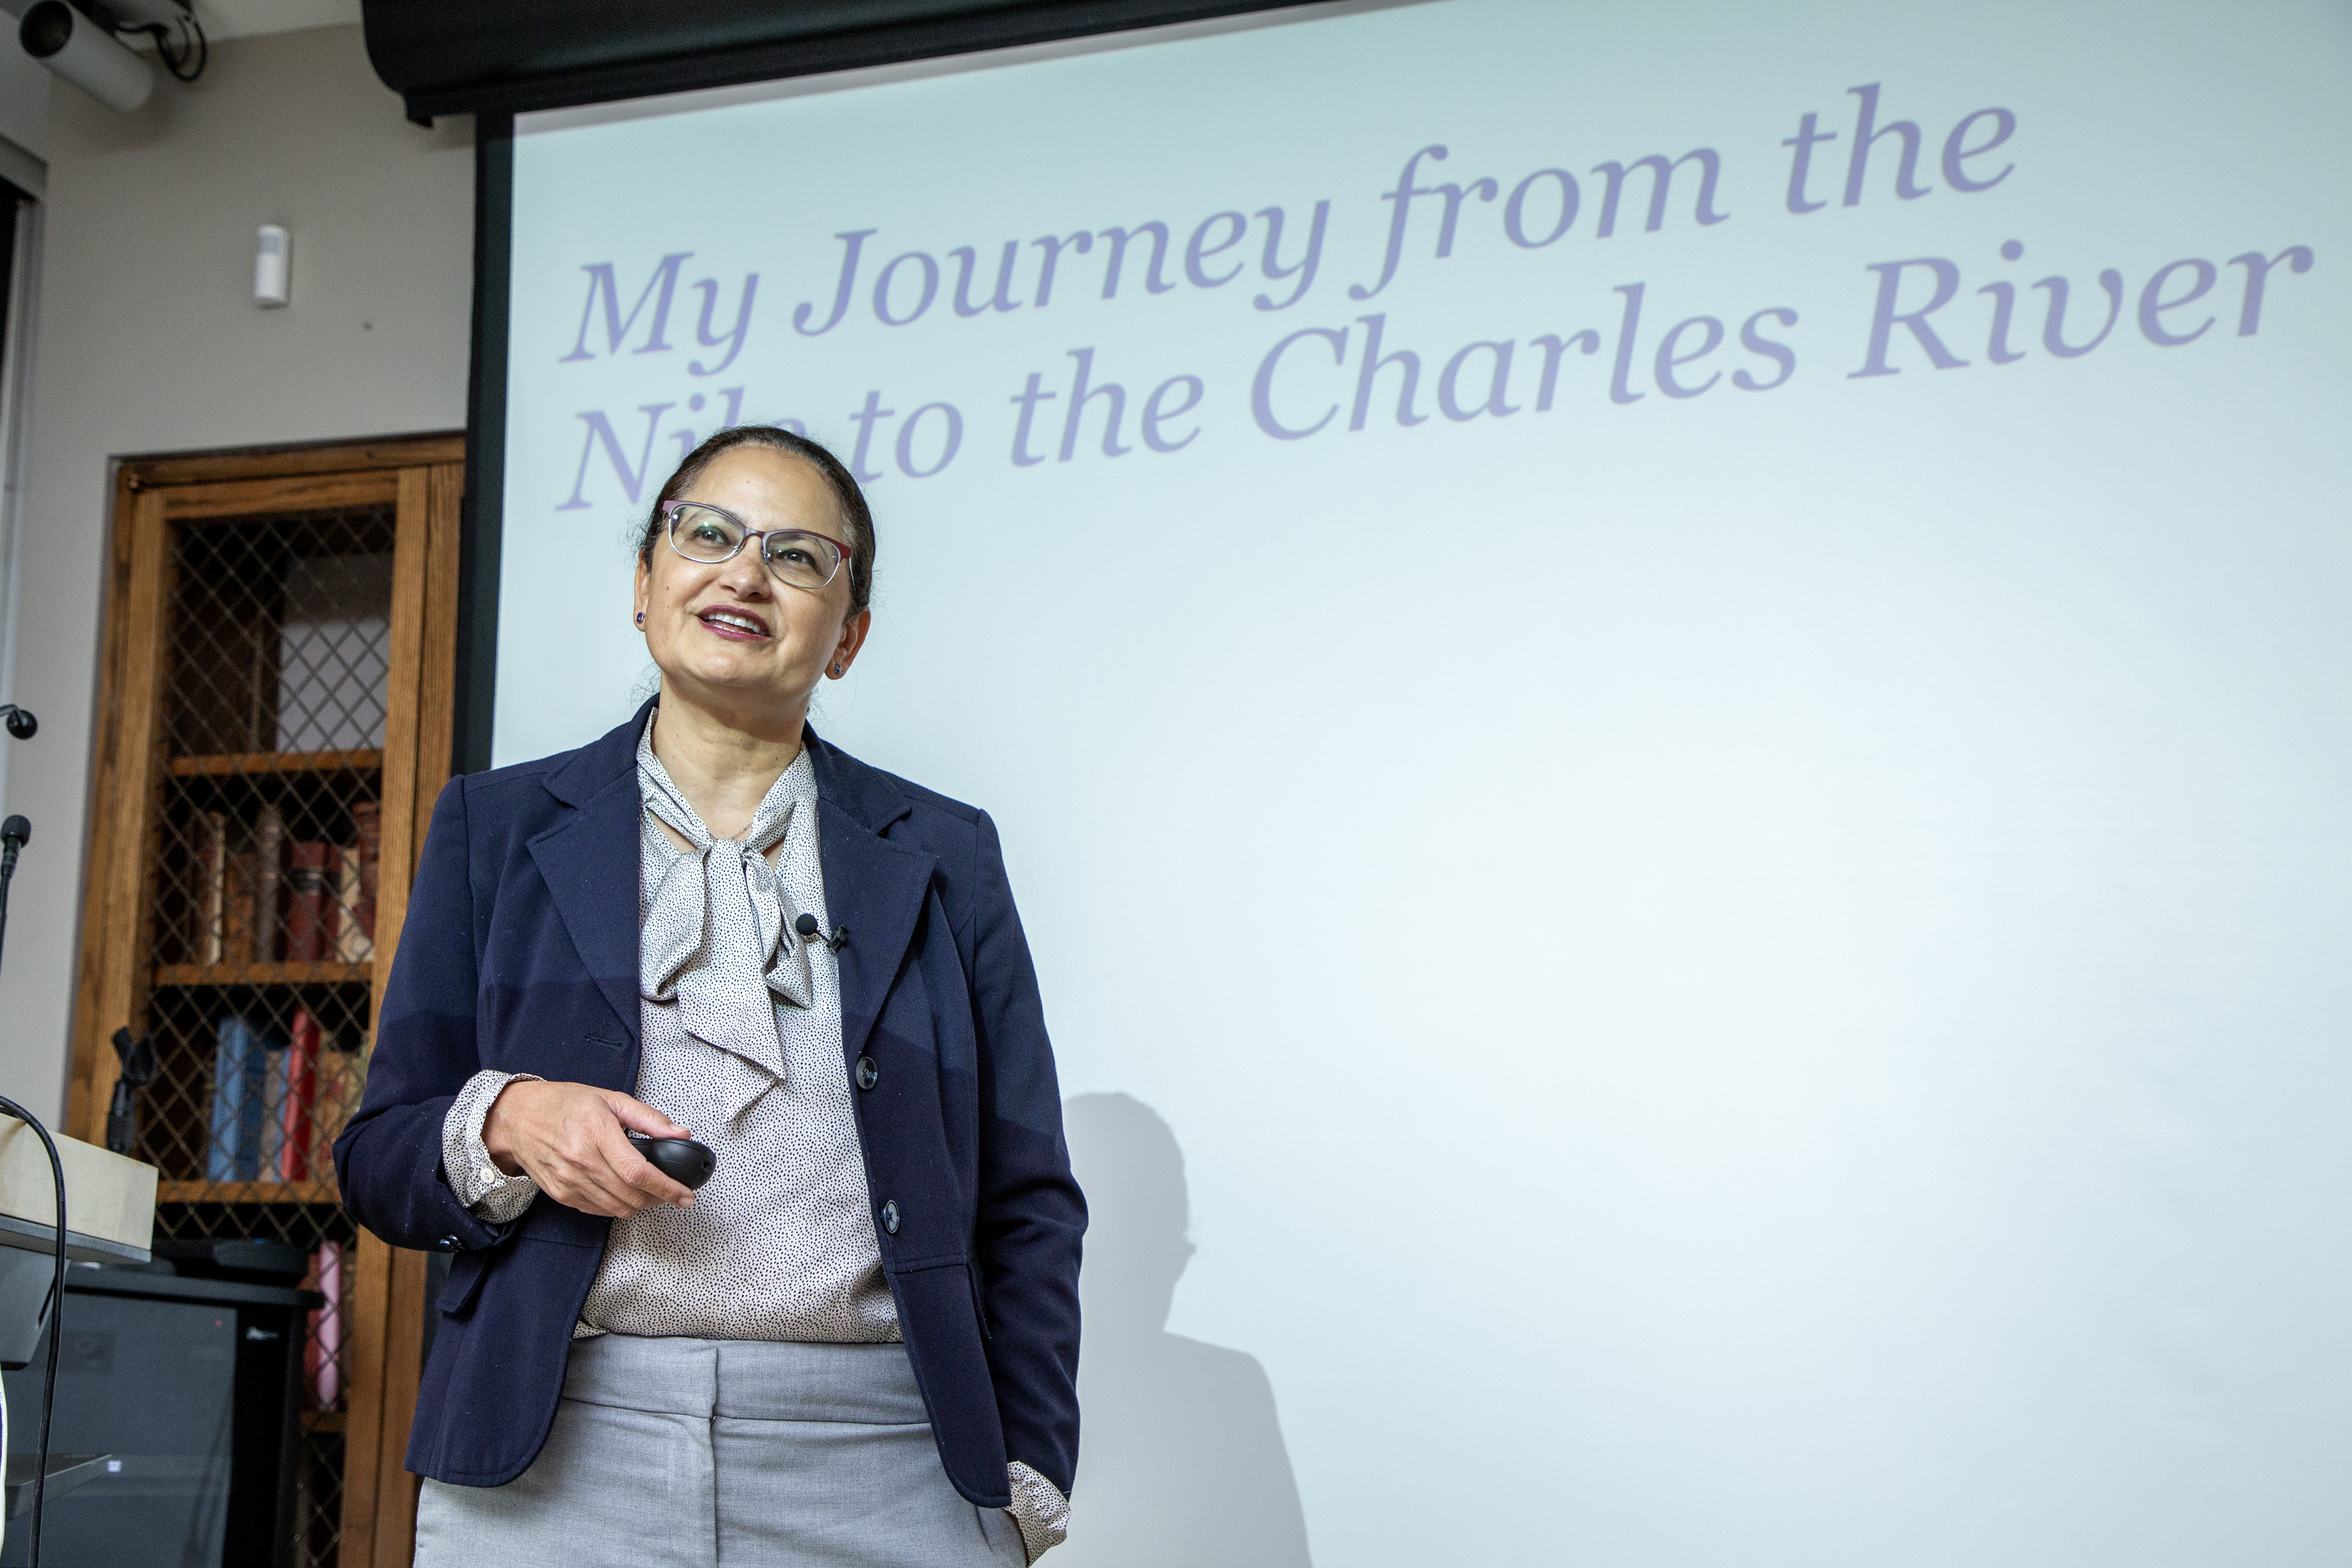 Nawal Nour stands in front of a projector screen with her presentation title, "My Journey from the Nile to the Charles River."